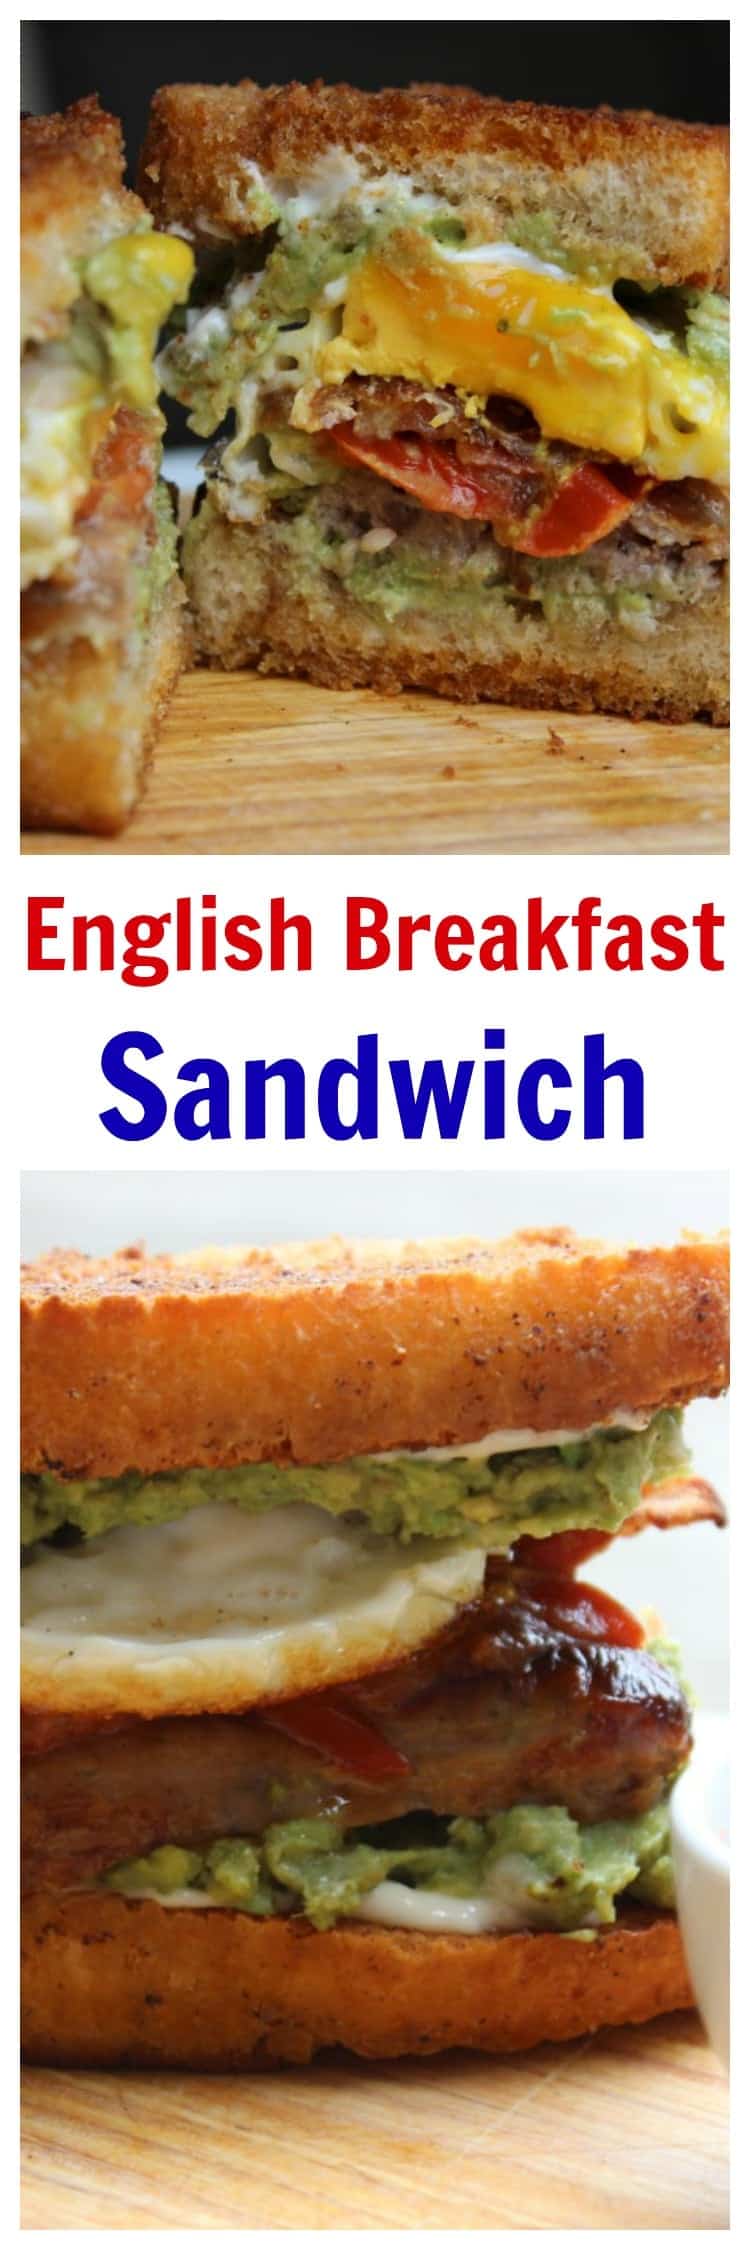 Fried Bread English Breakfast Sandwich. This full English breakfast in a sandwich is an indulgent way to start the day and banish a hangover! Ready in 30 minutes